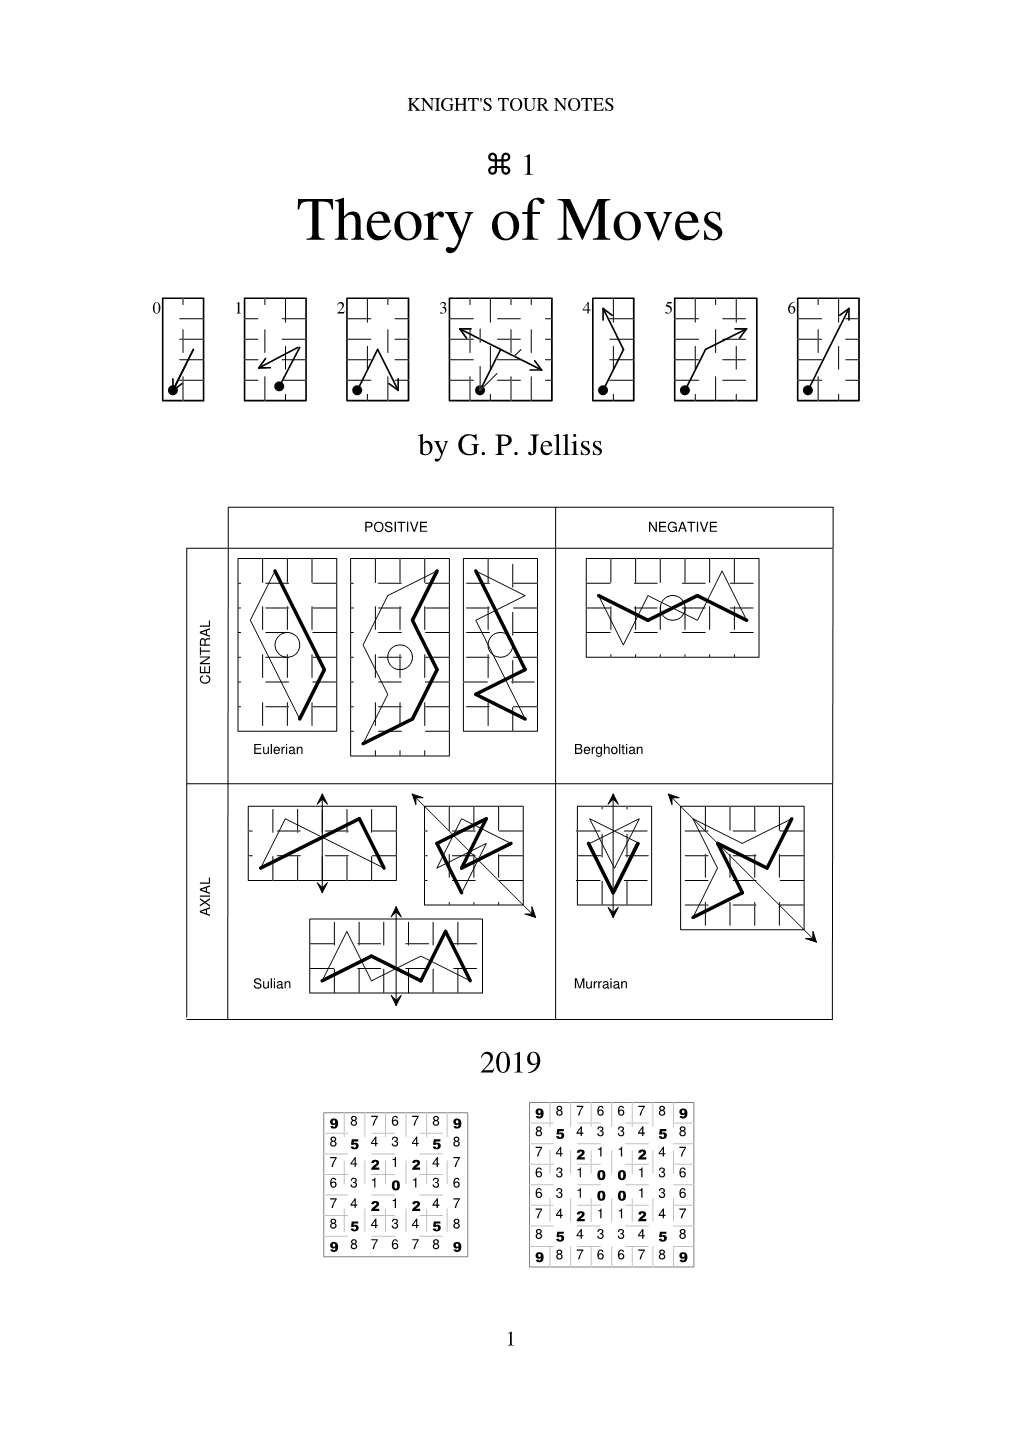 1 — Theory of Moves